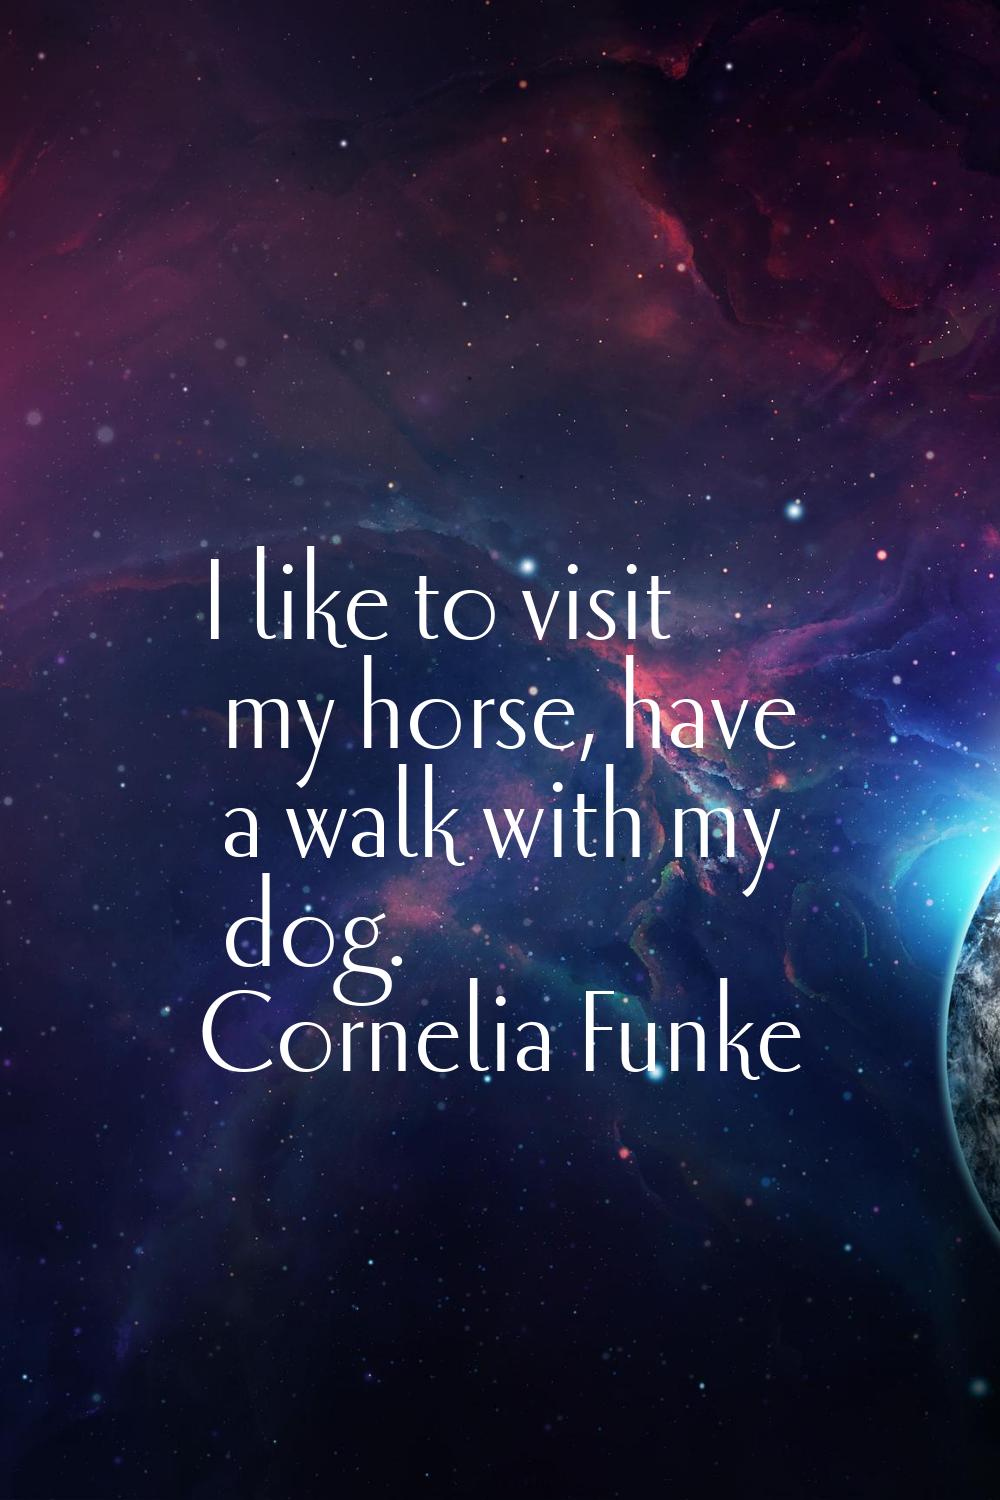 I like to visit my horse, have a walk with my dog.